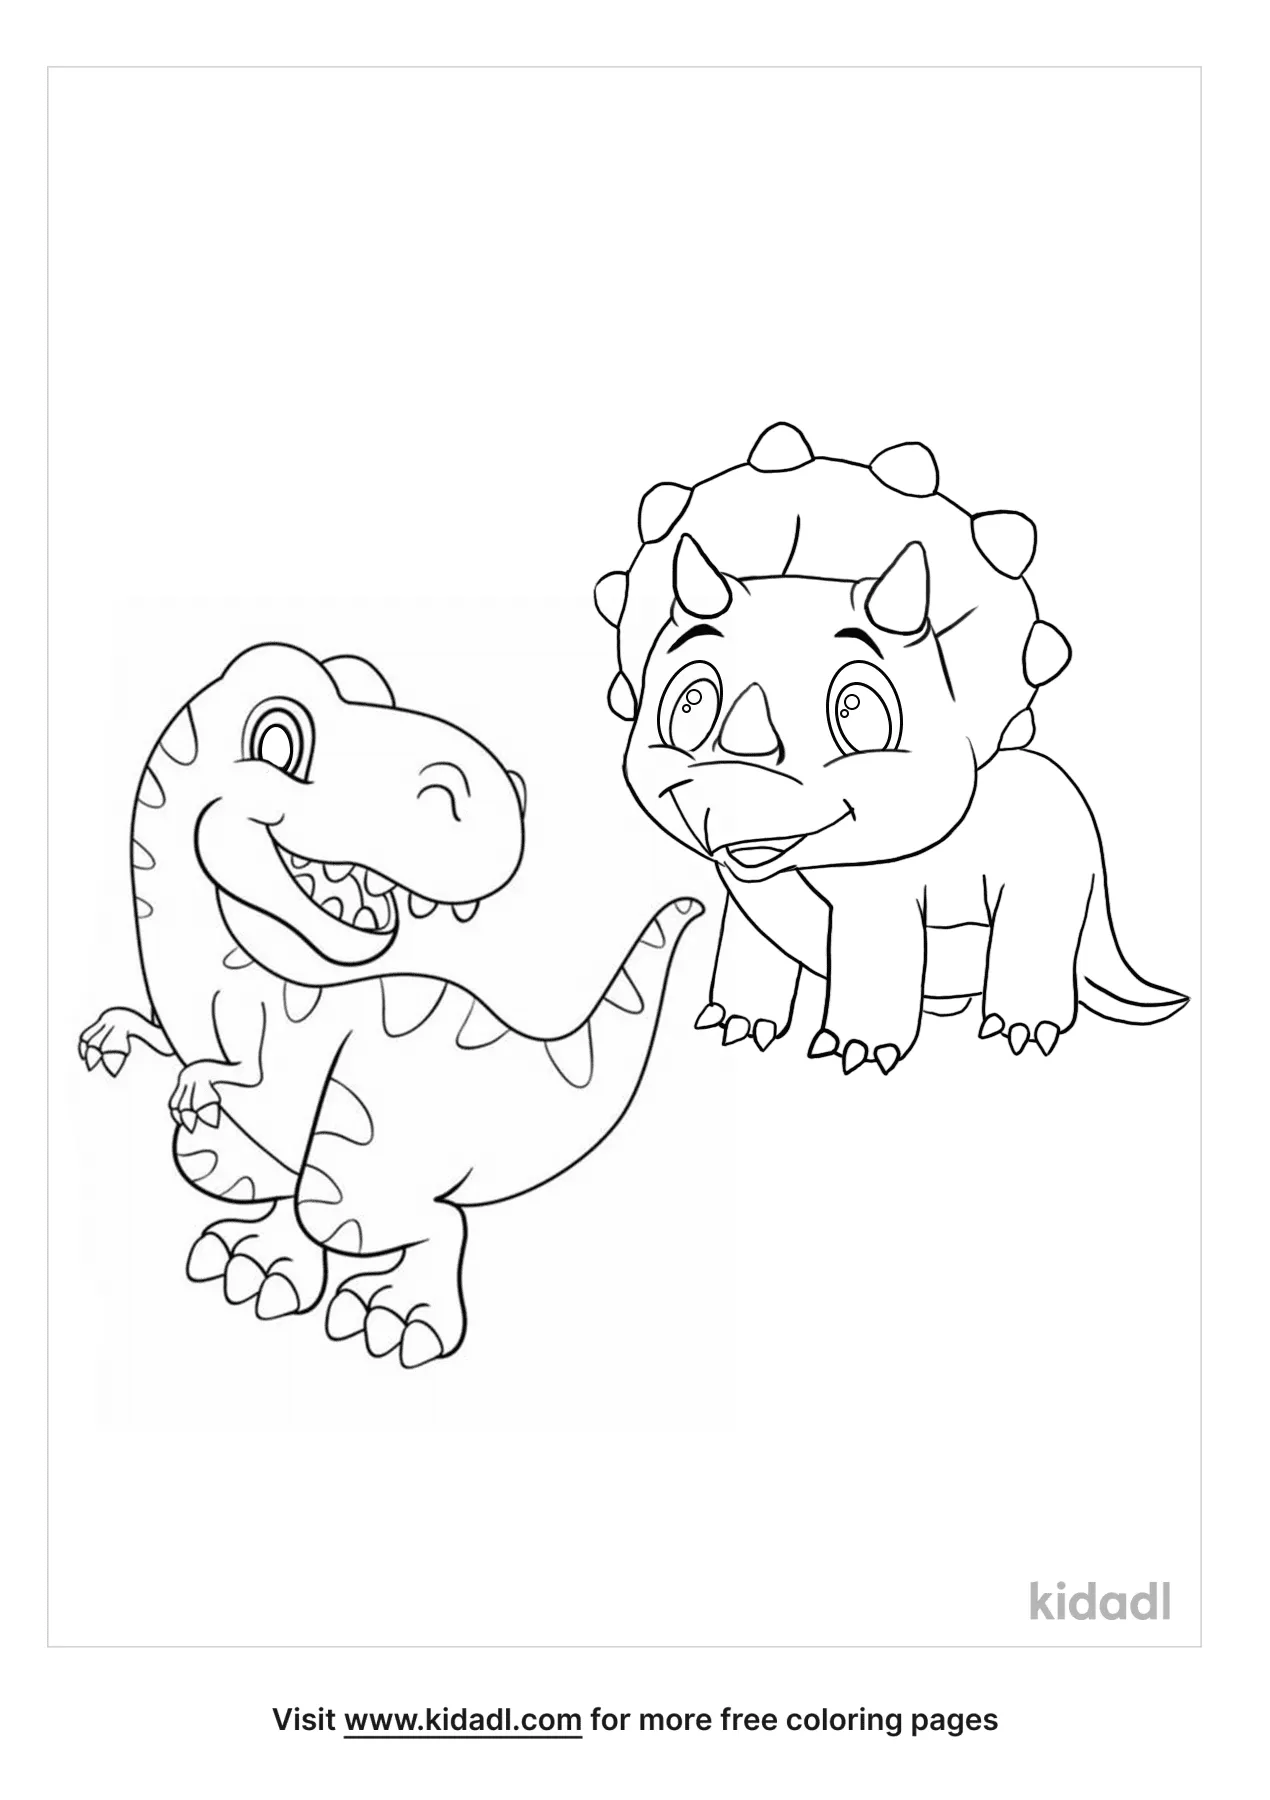 T-Rex And Triceratops Coloring Page